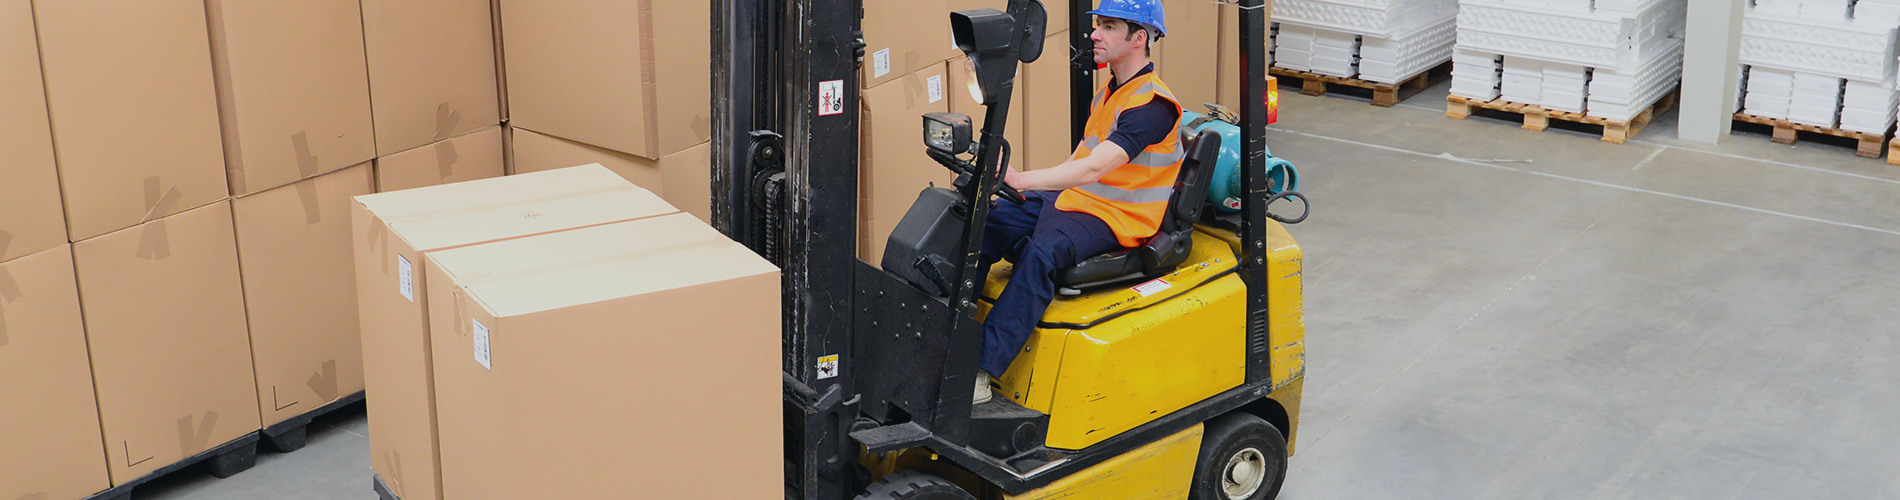 Professional forklift operator with precise handling and safety